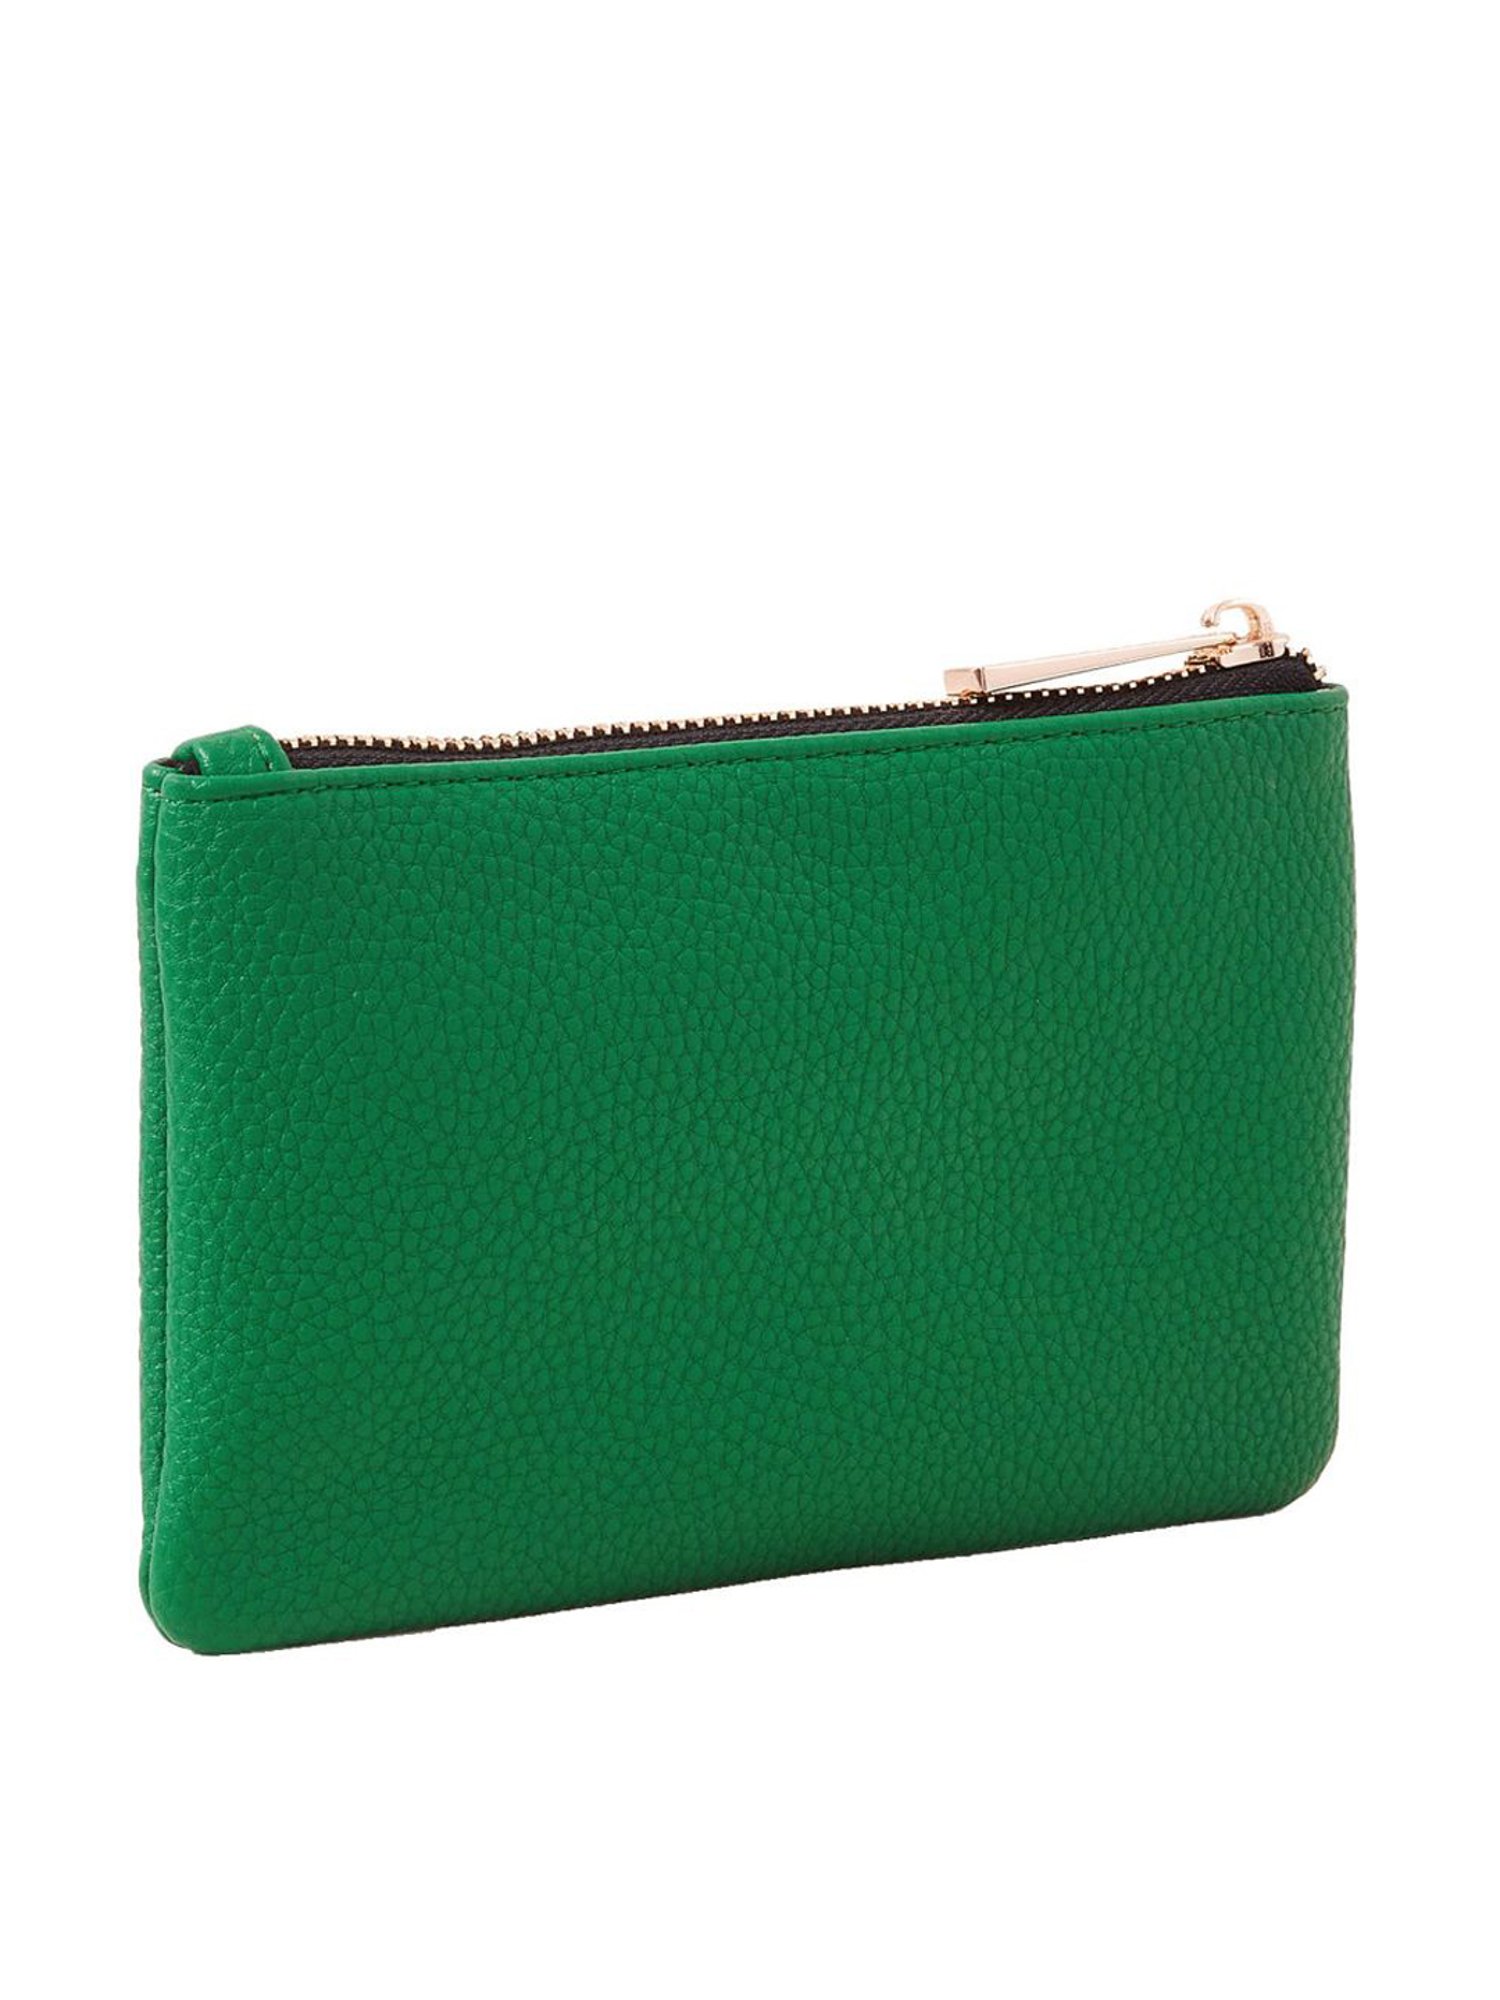 Buy Accessorize London Womens Faux Leather Green Classic Coin Purse Online